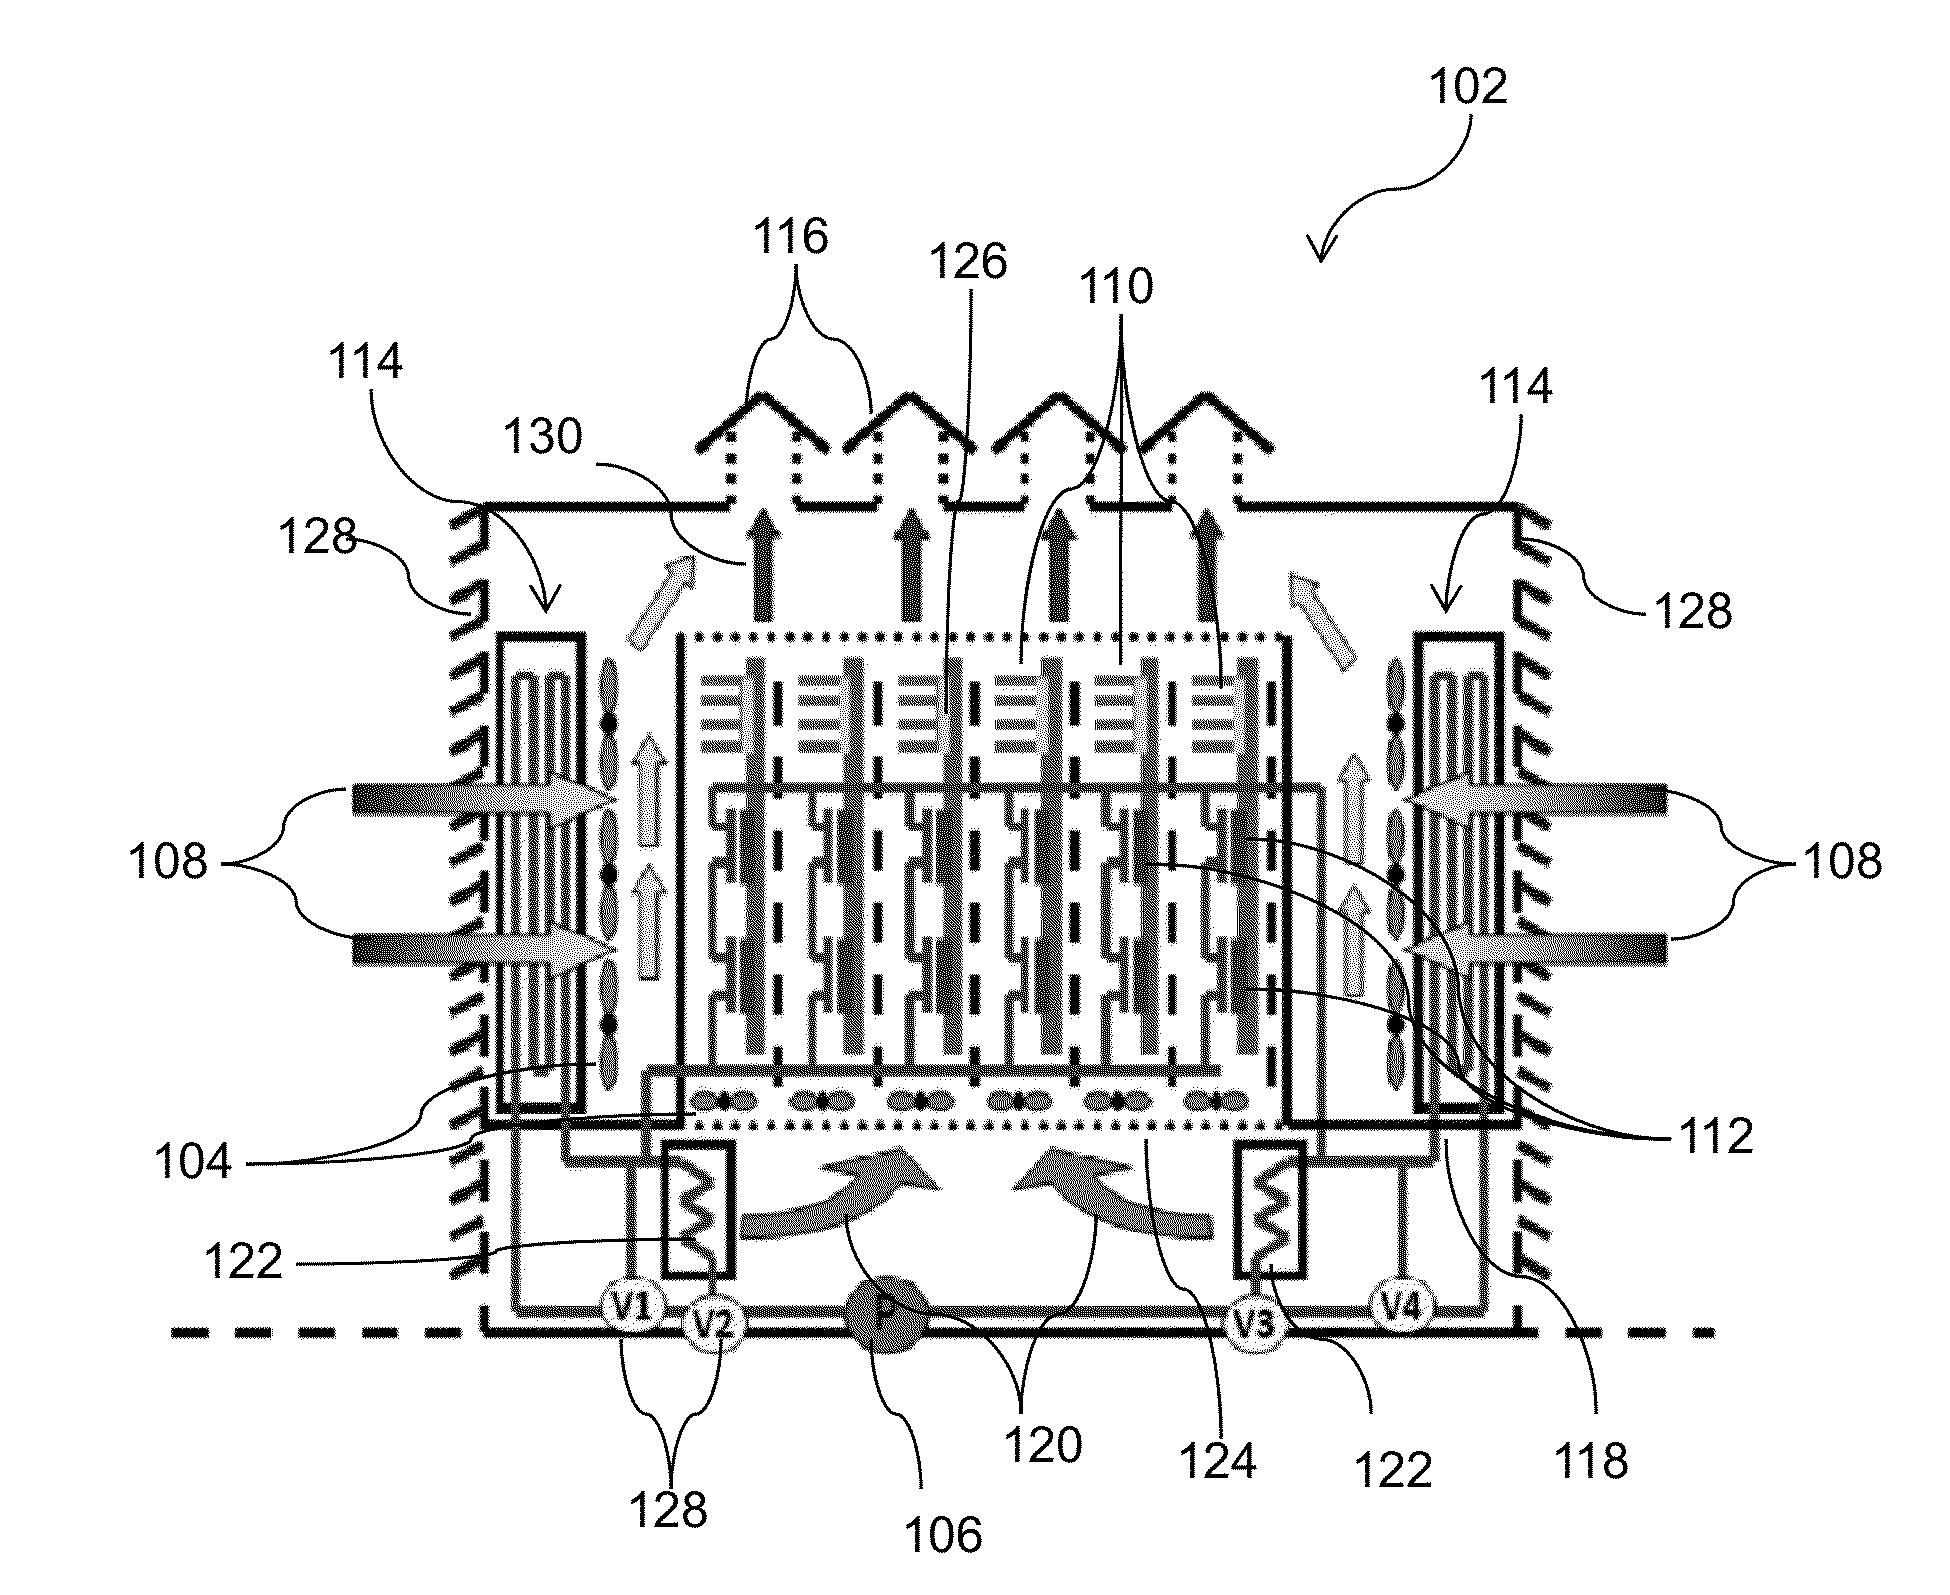 Server cooling system without the use of vapor compression refrigeration